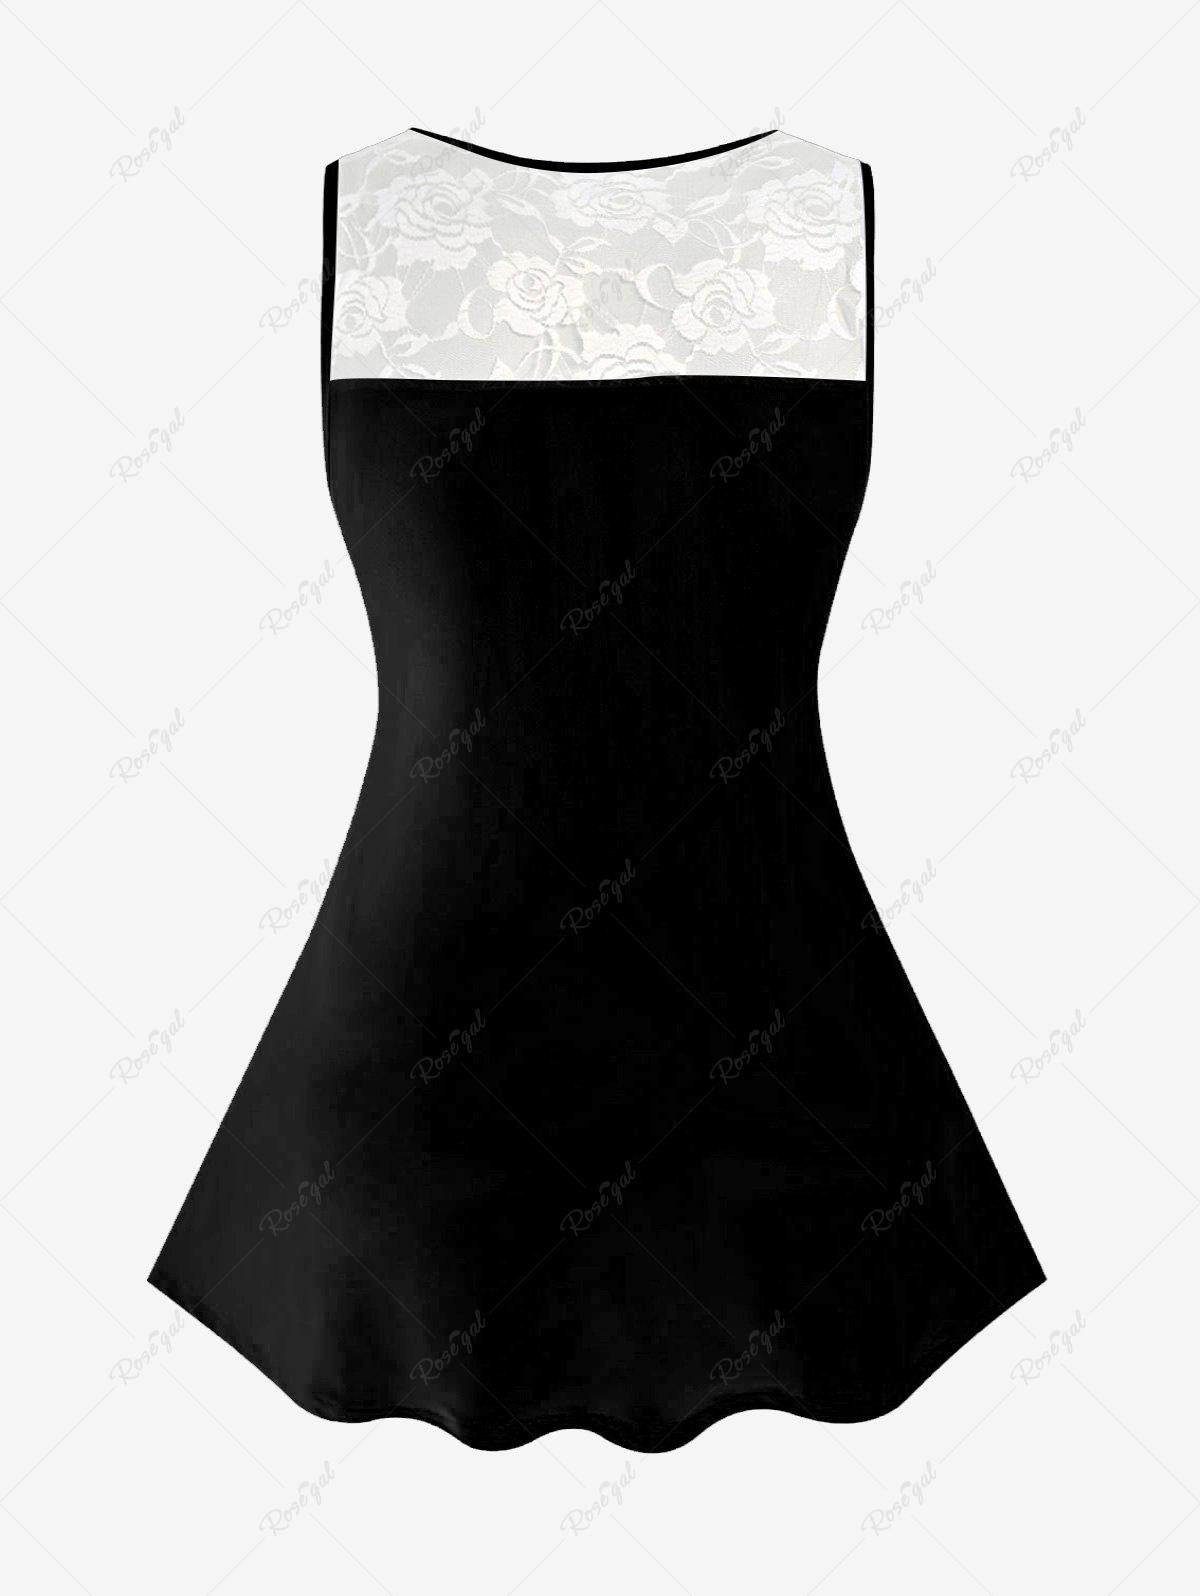 💗Tabbytragedy Loves💗 Gothic 3D Print Lace Panel Sleeveless Top